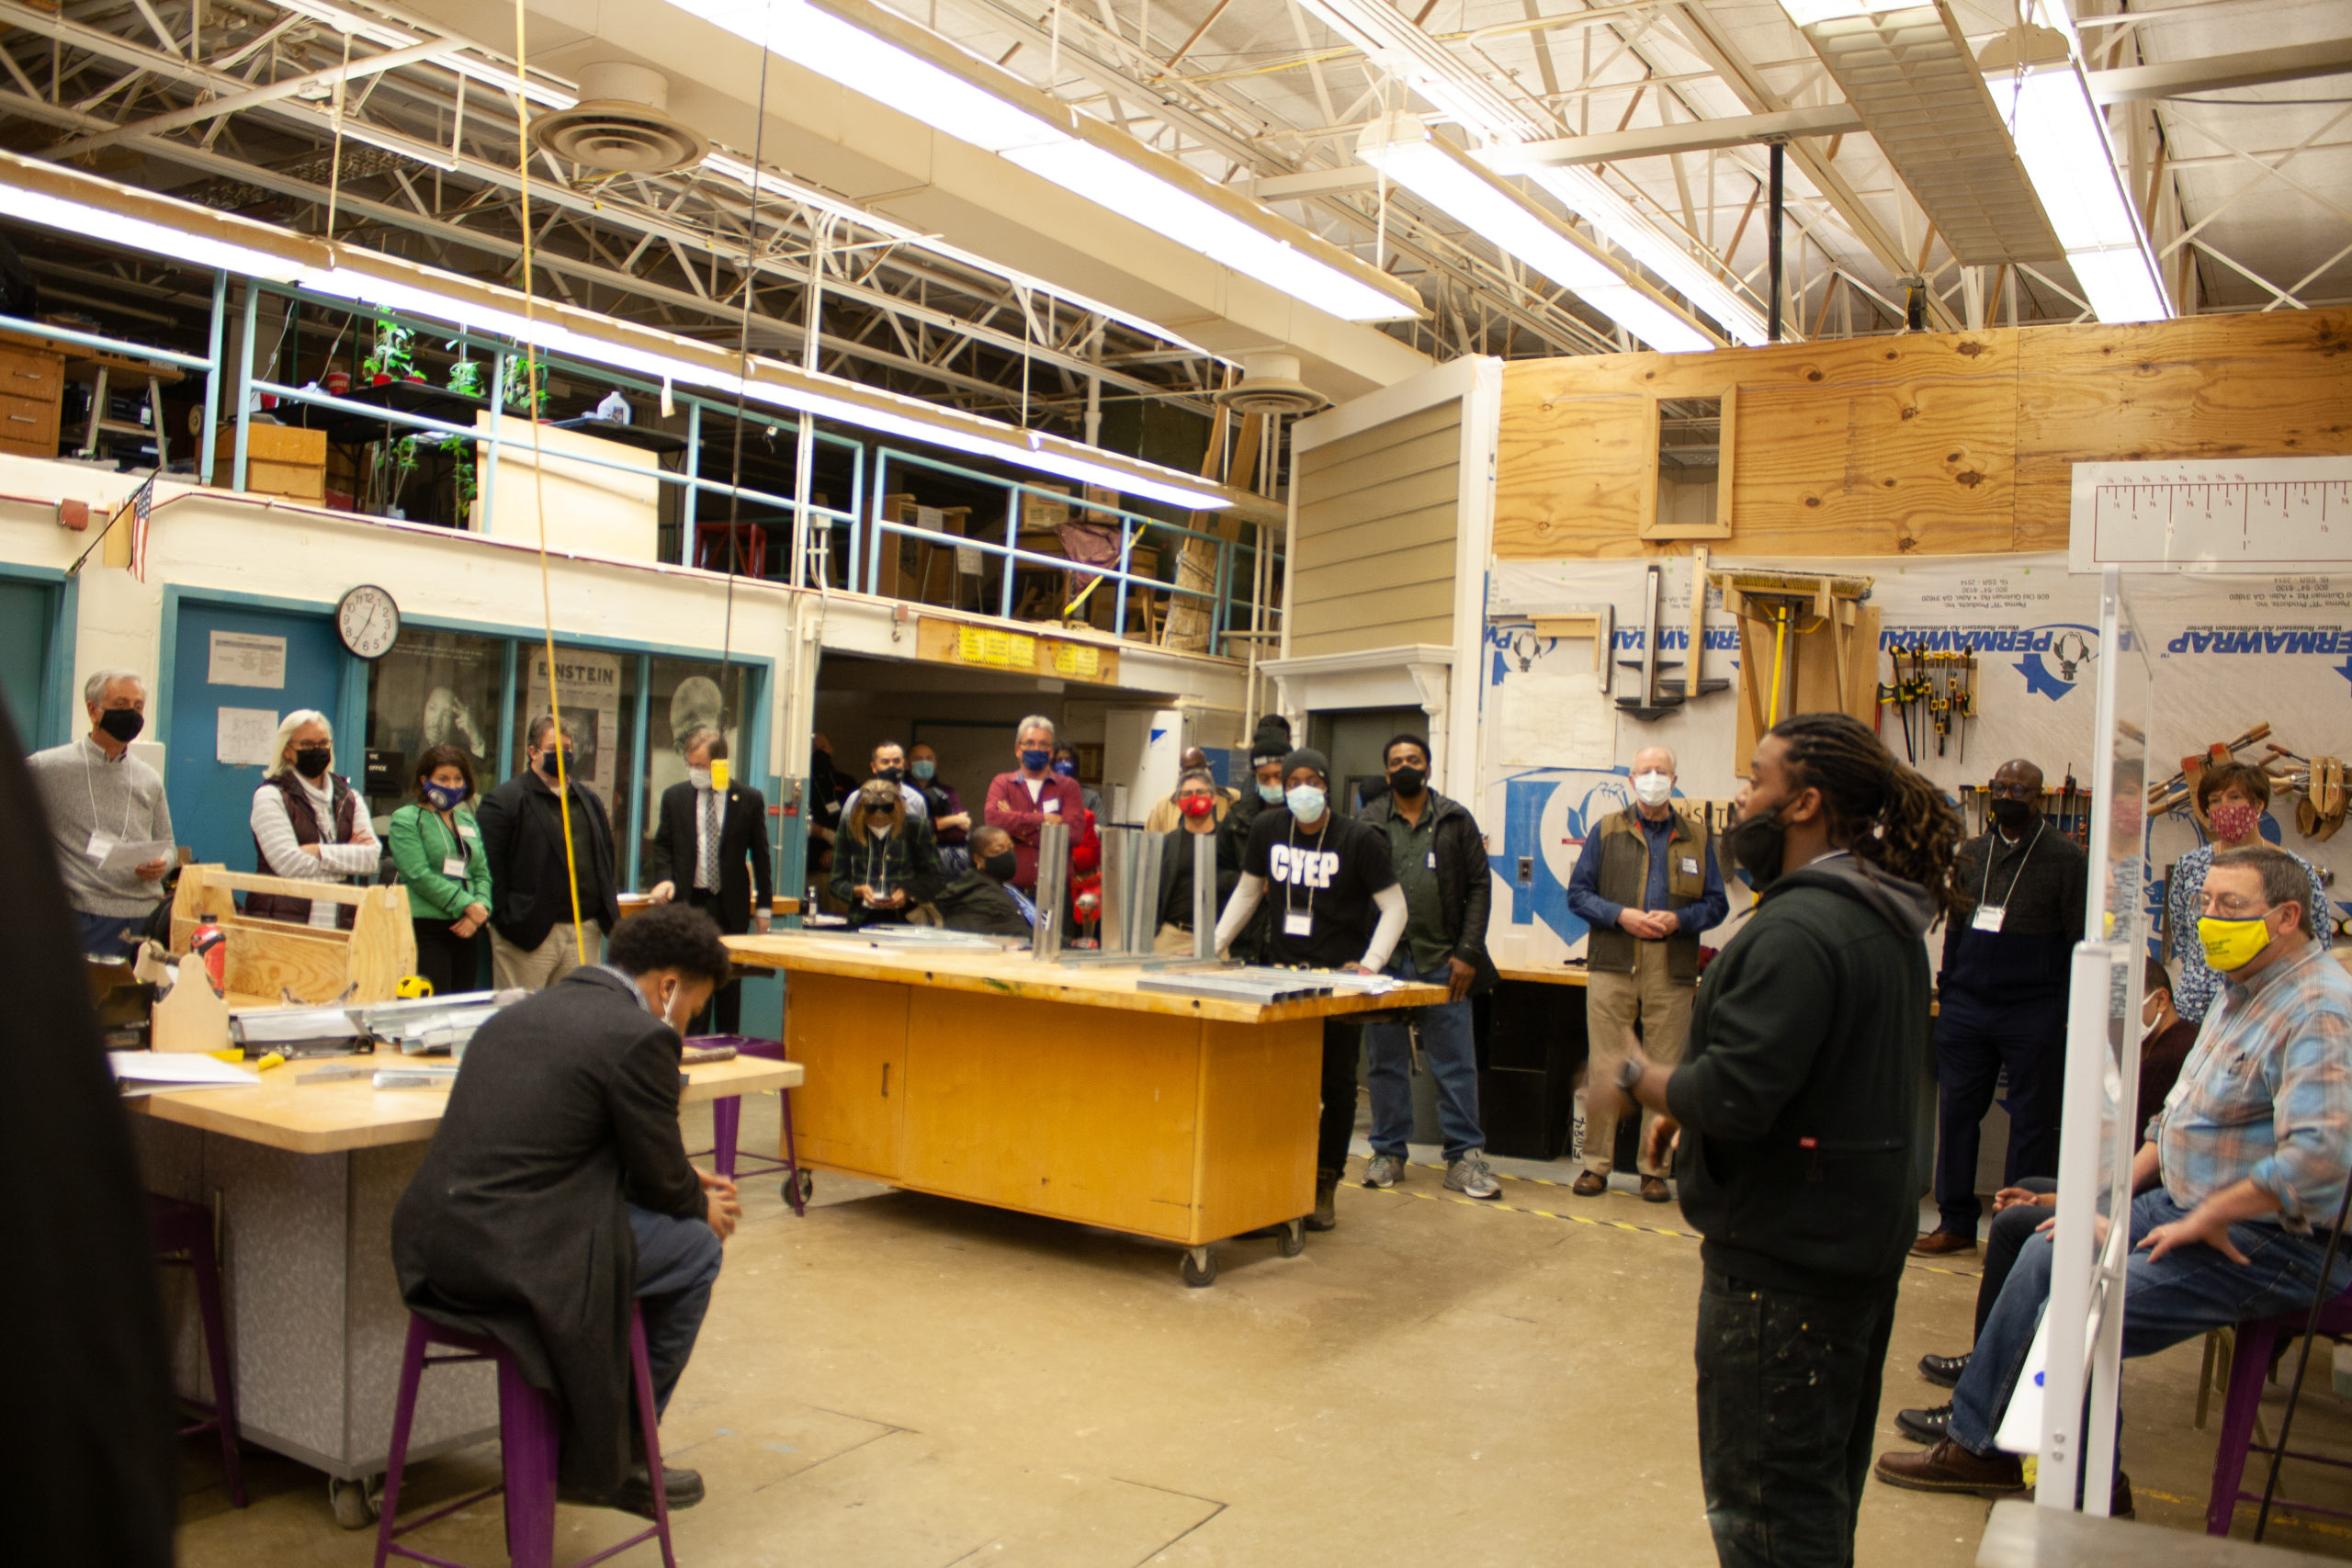 Carpenters Partner with Local Youth Program to Continue Bringing More Career Paths in DC Area